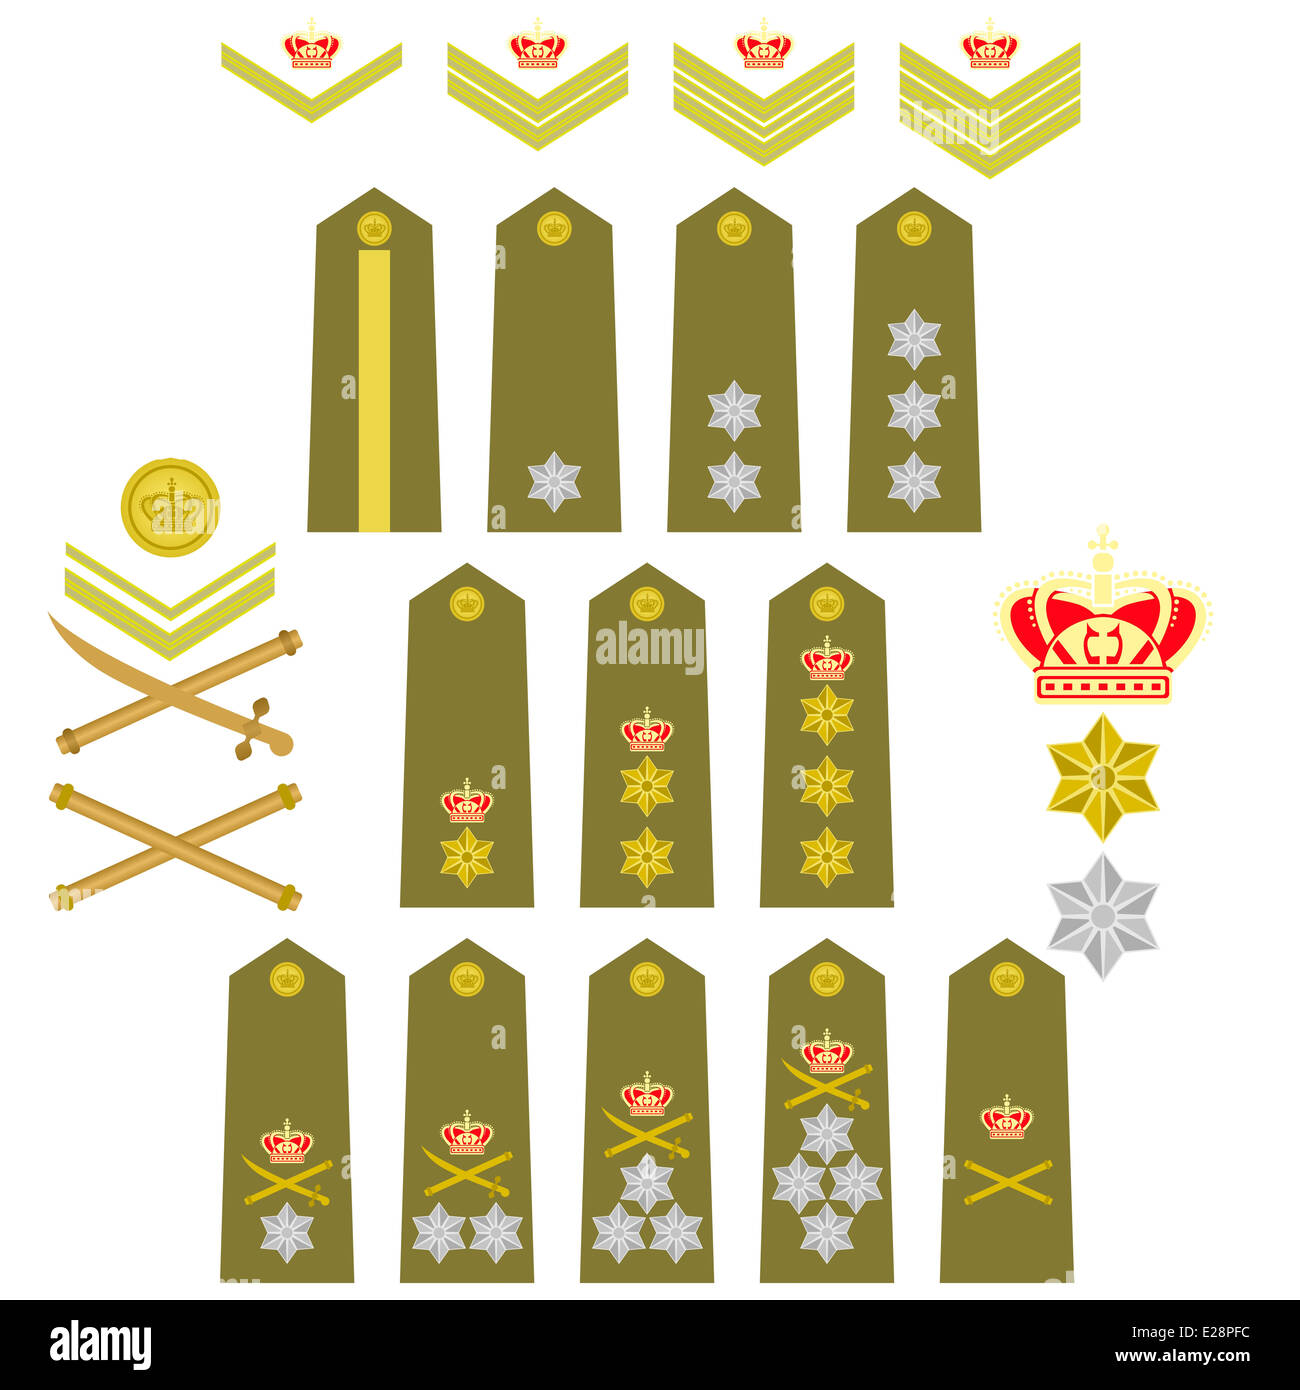 Military ranks and insignia of the world. Illustration on white background. Stock Photo